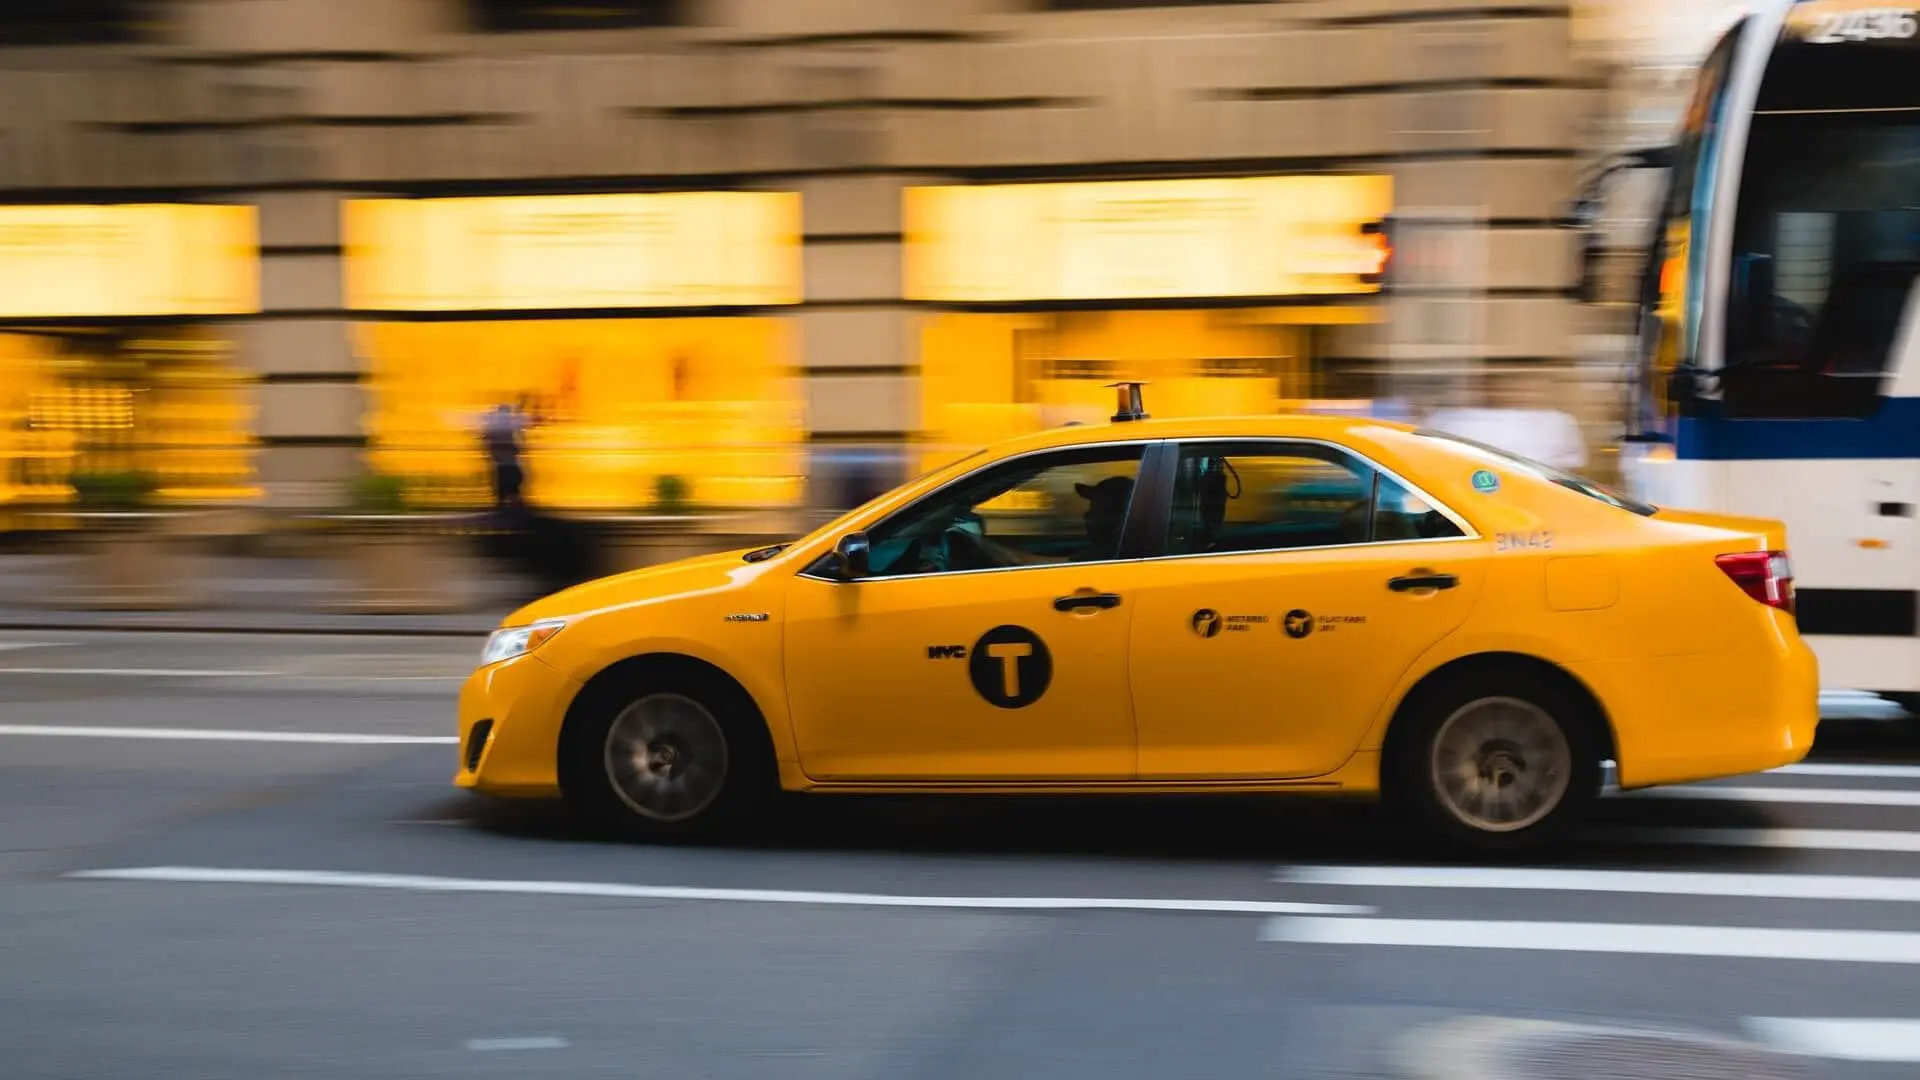 newark airport to manhattan taxi cost - How much is cab from Newark to Manhattan